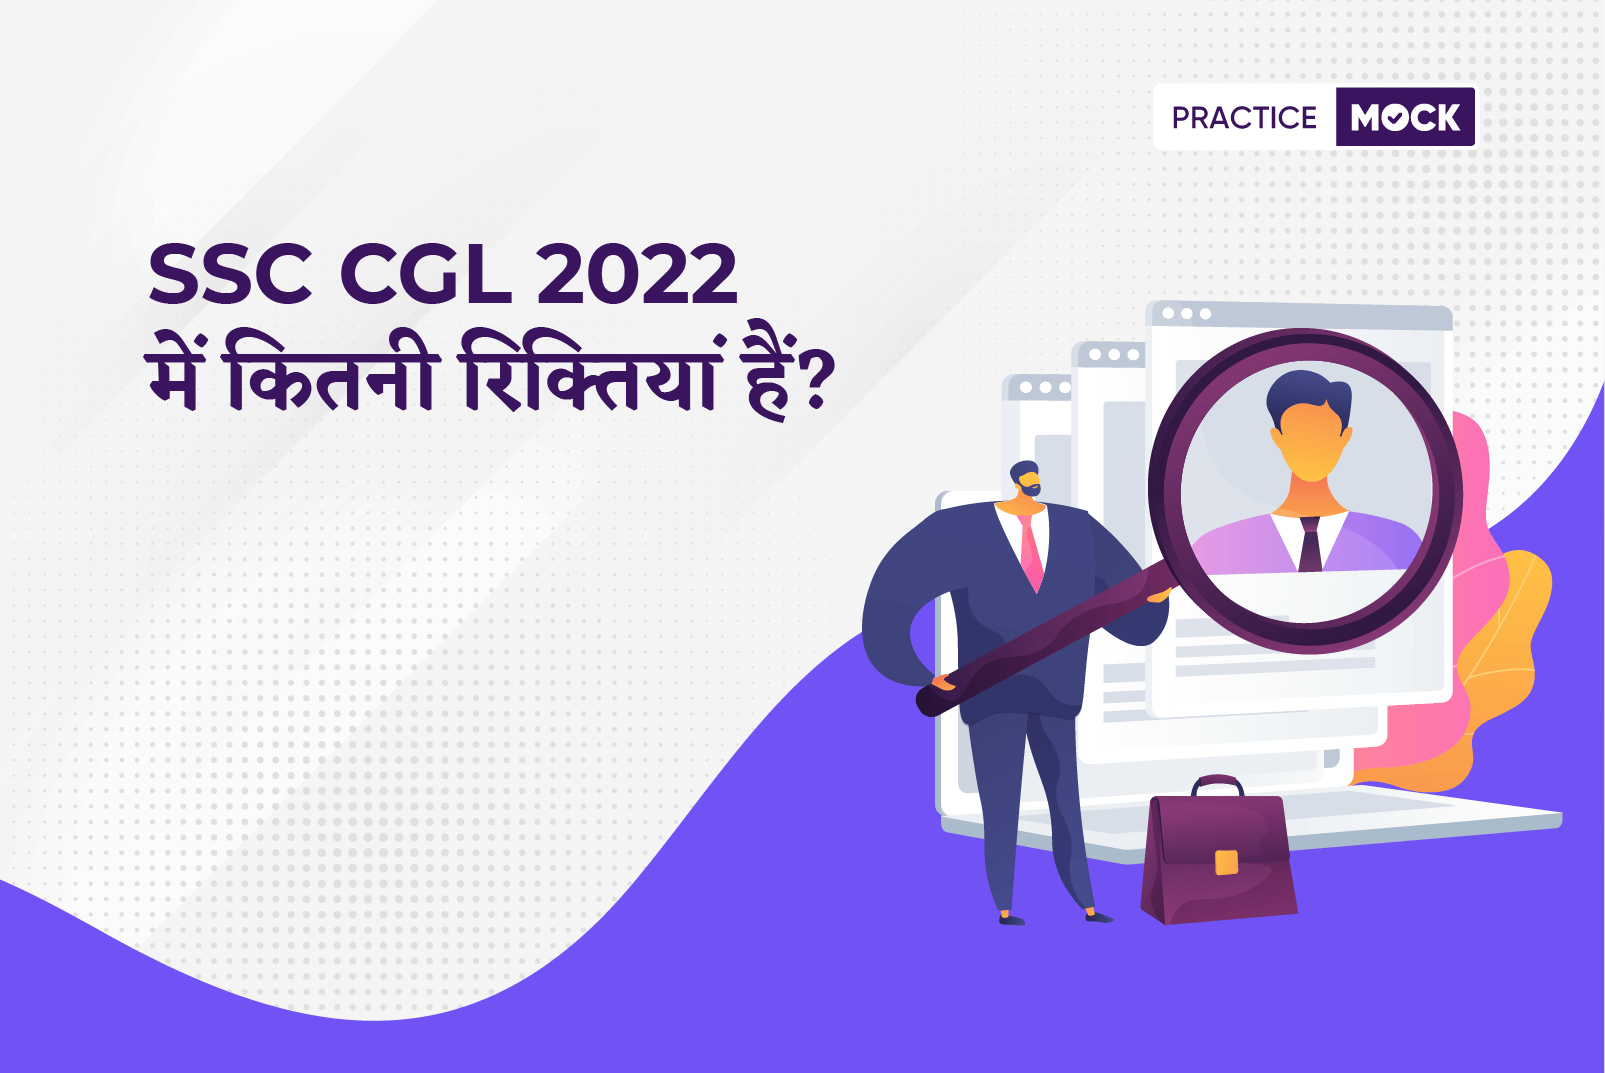 Will the SSC CGL 2022-23 Vacancies be reduced?